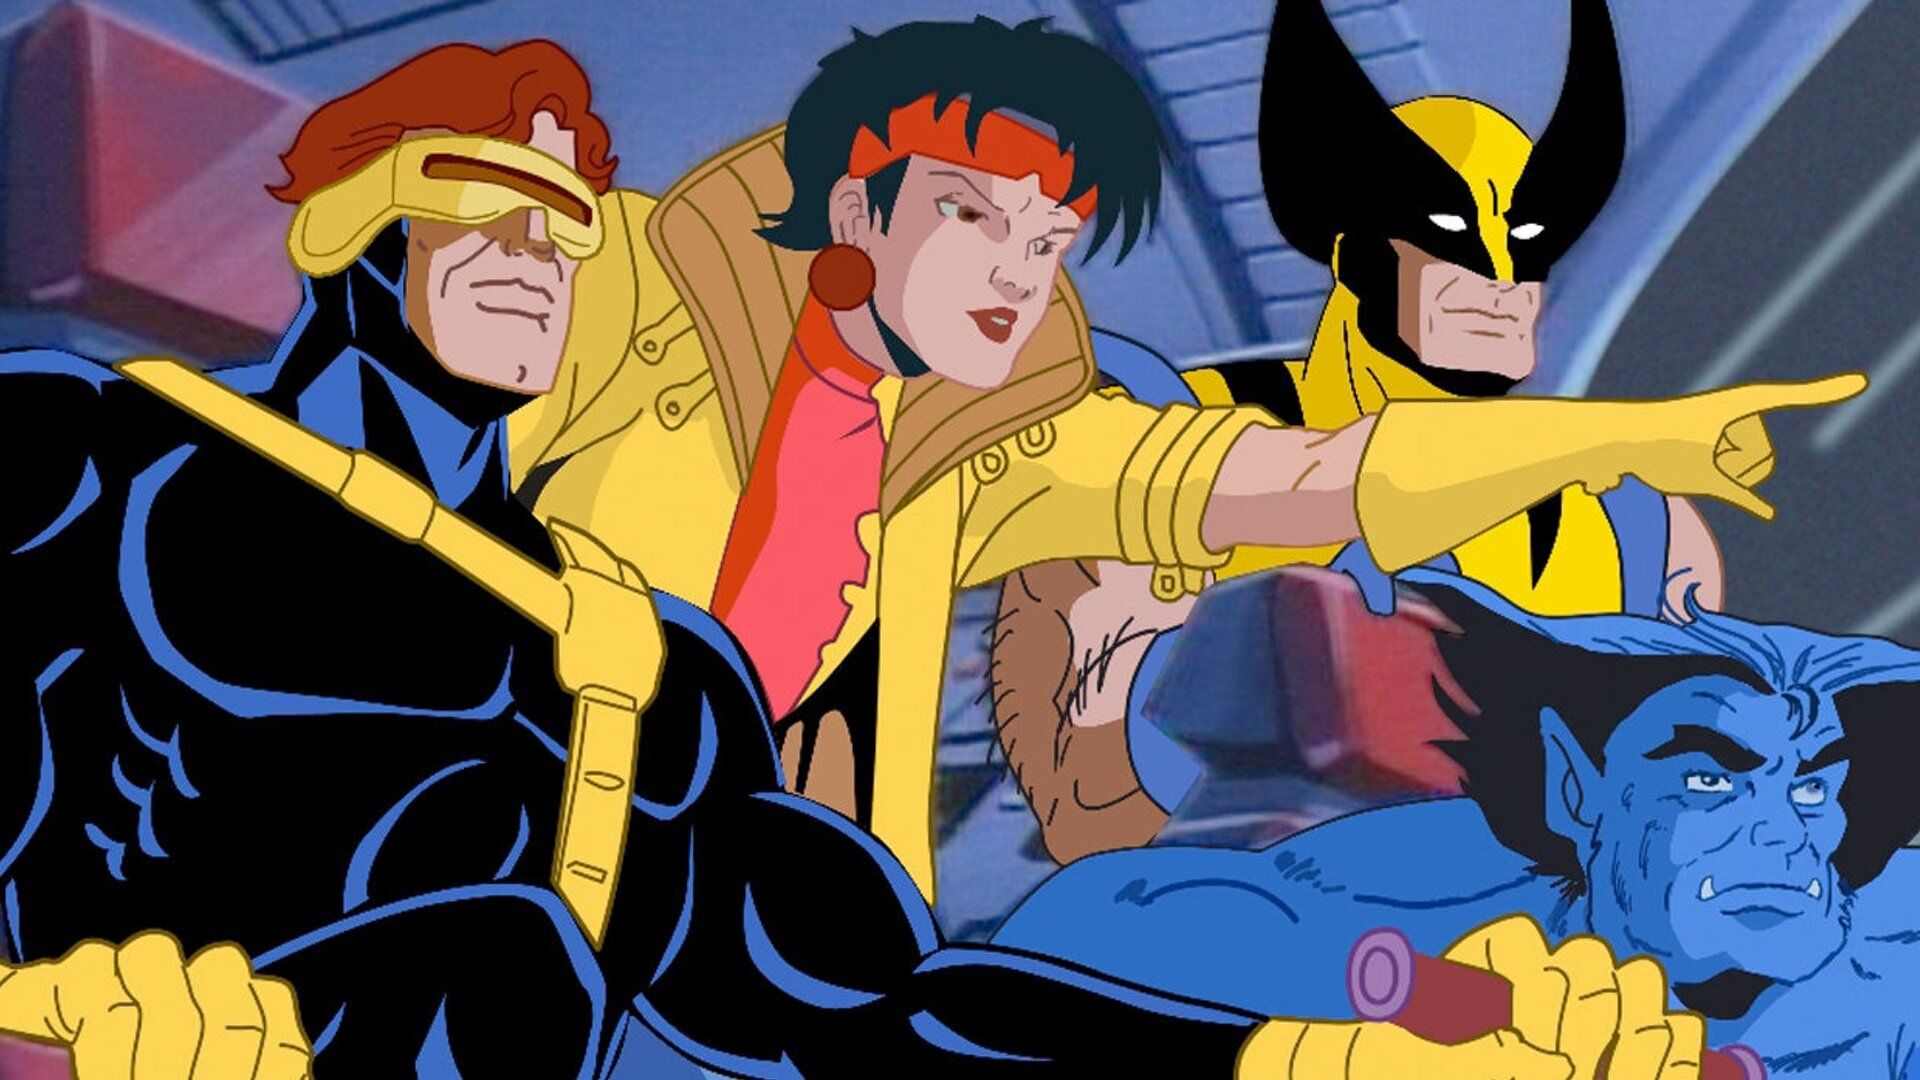 The Creators Of The 90s X MEN Animated Series Tease A New Project They're Developing